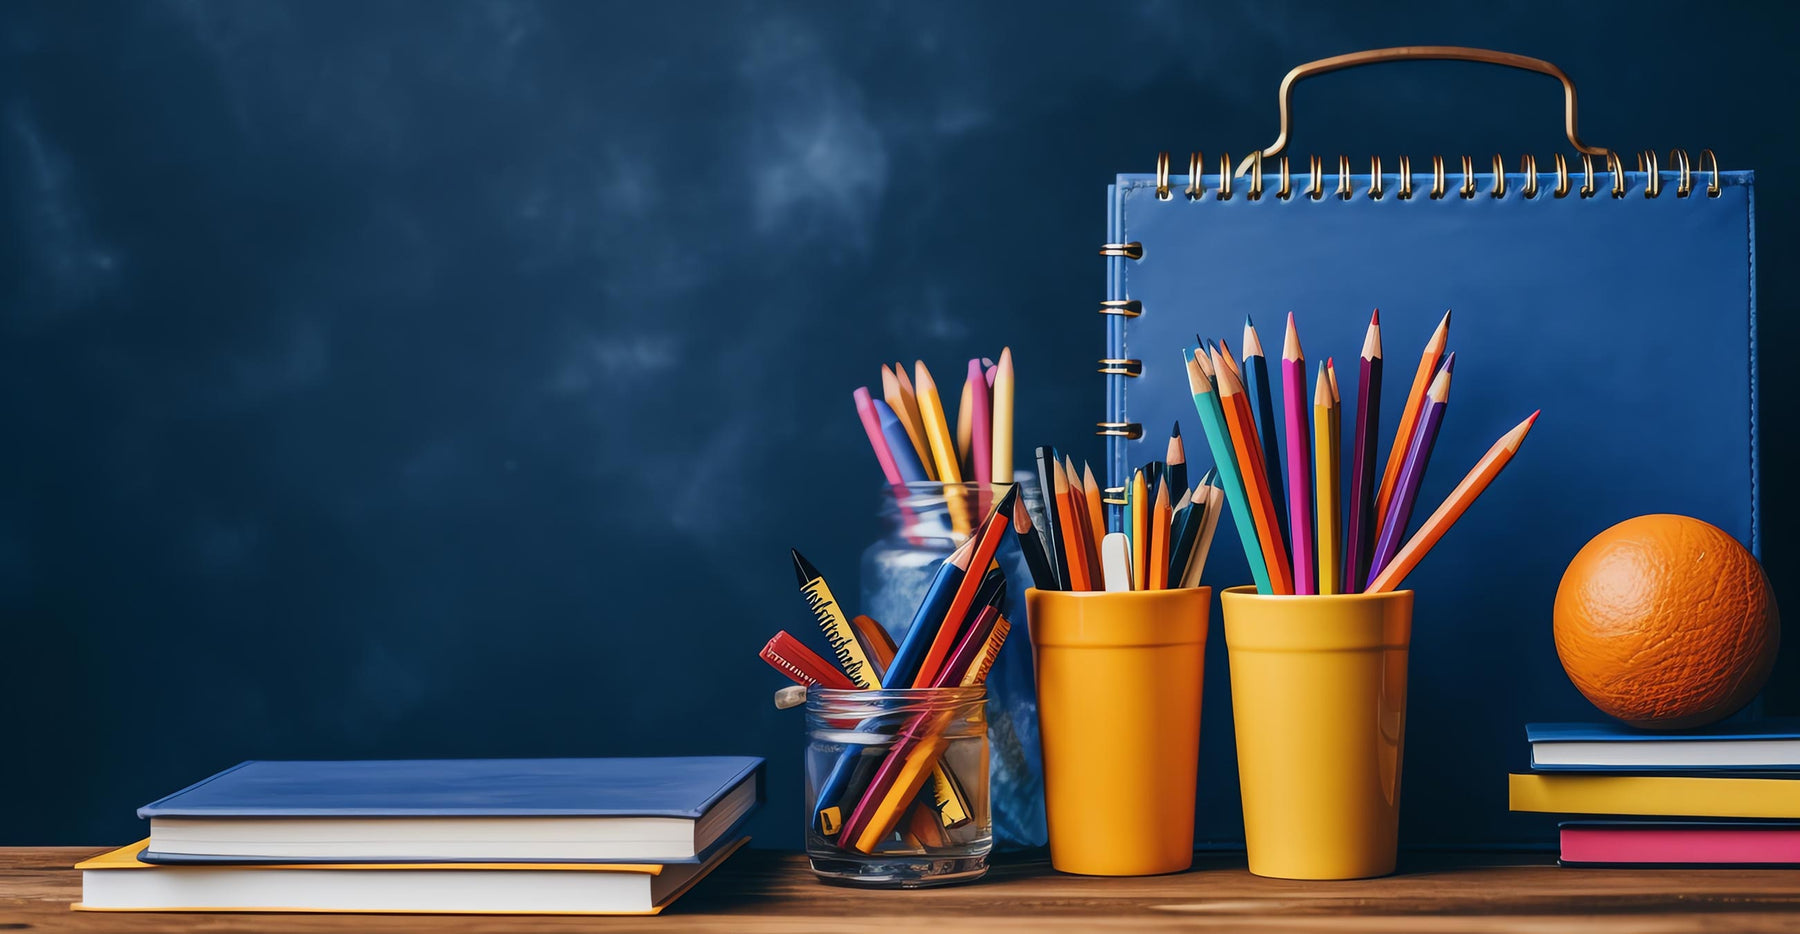 Advantages of Purchasing Bulk School Supply Kits in Canada